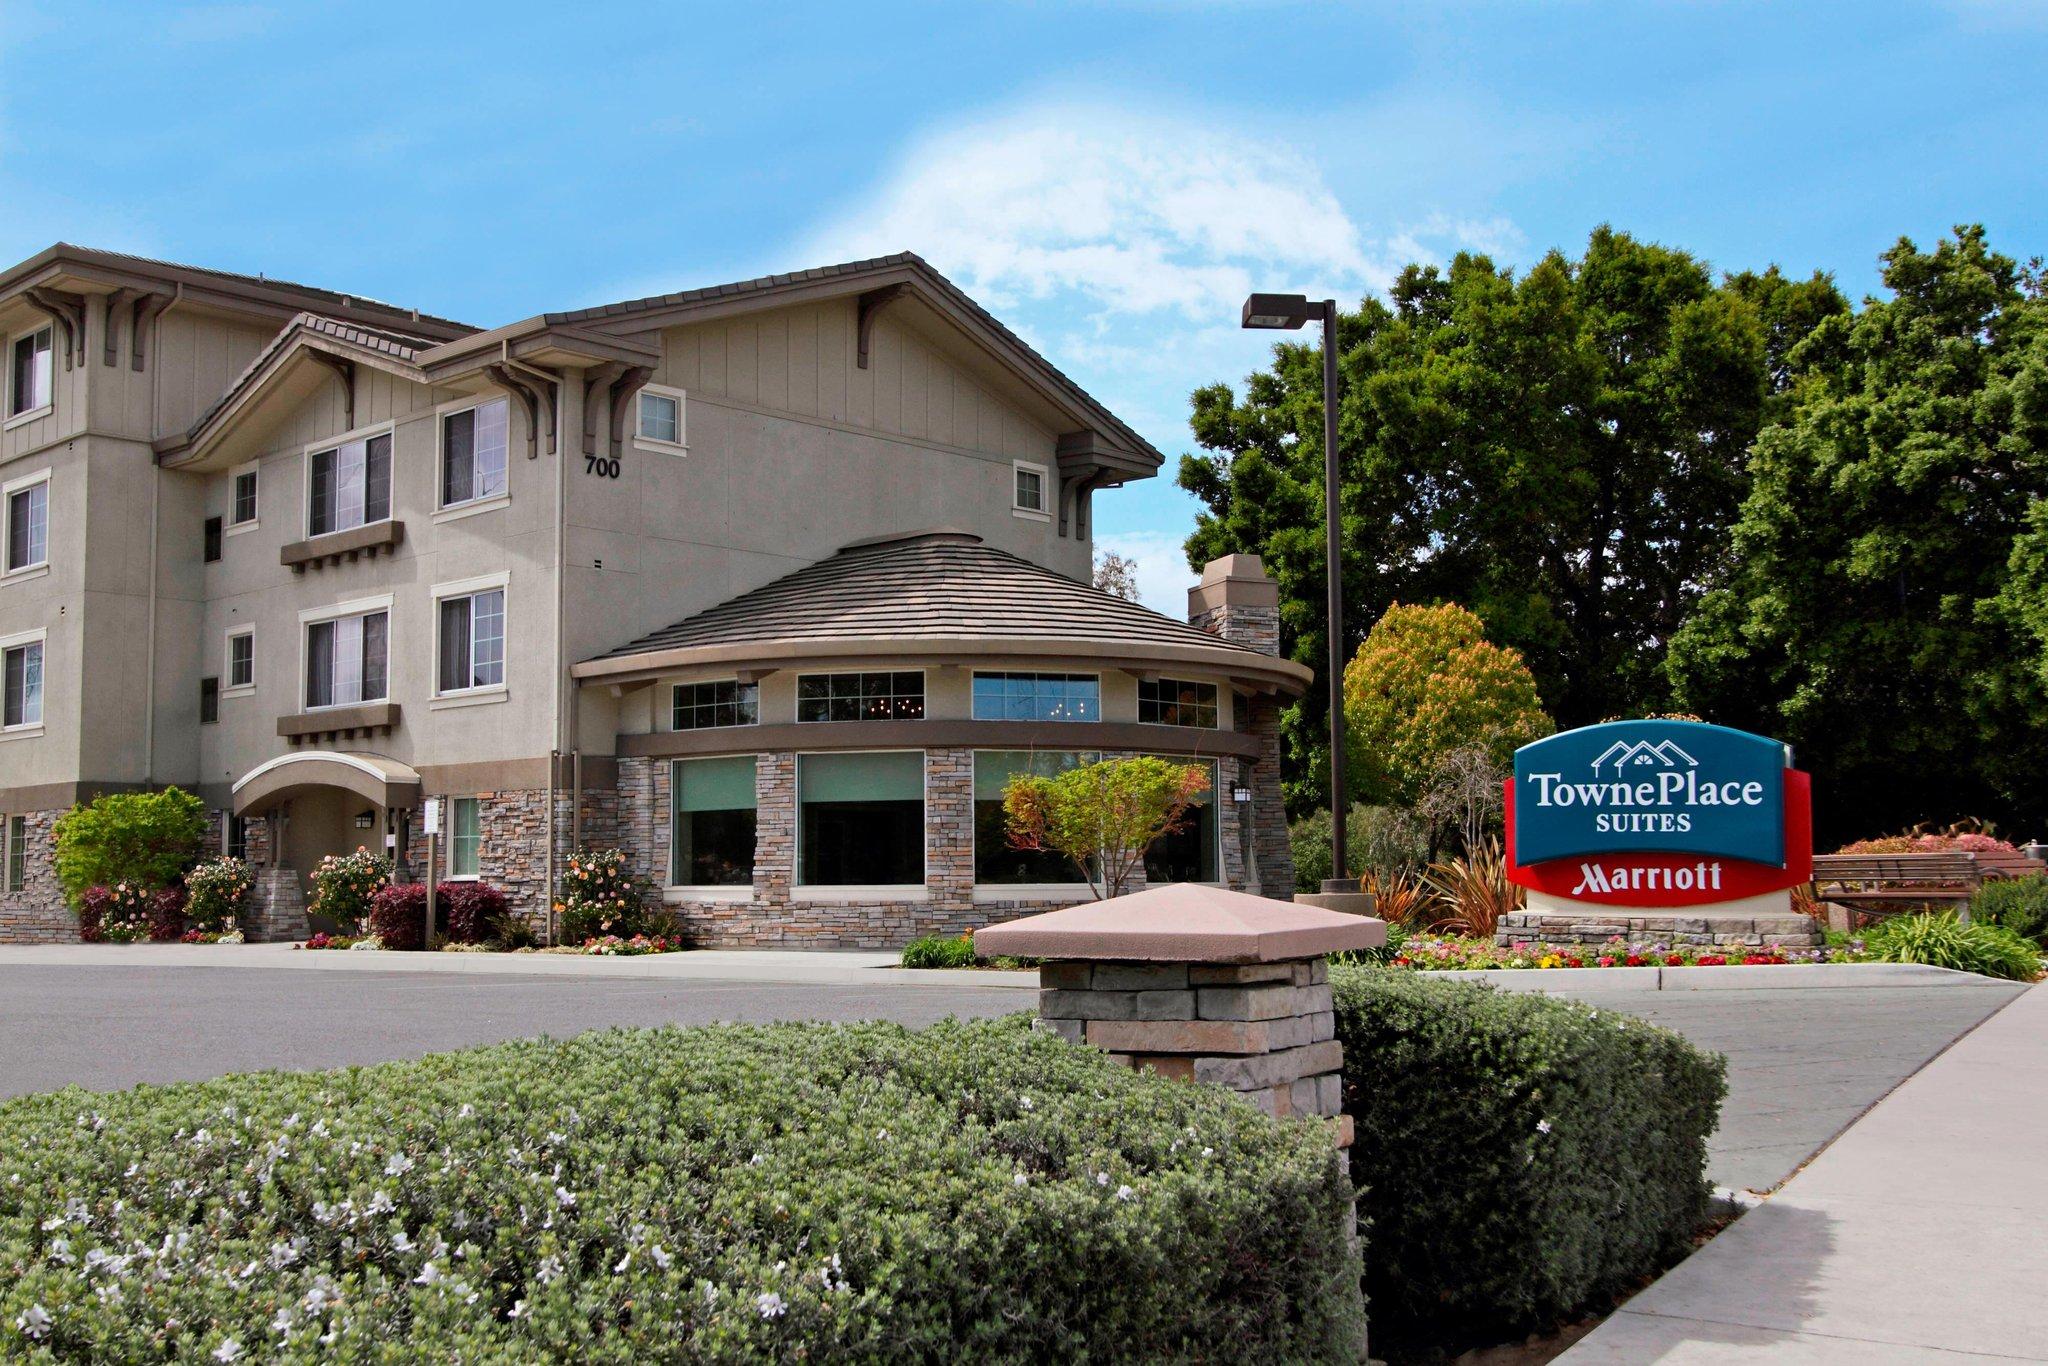 TownePlace Suites San Jose Campbell in Campbell, CA